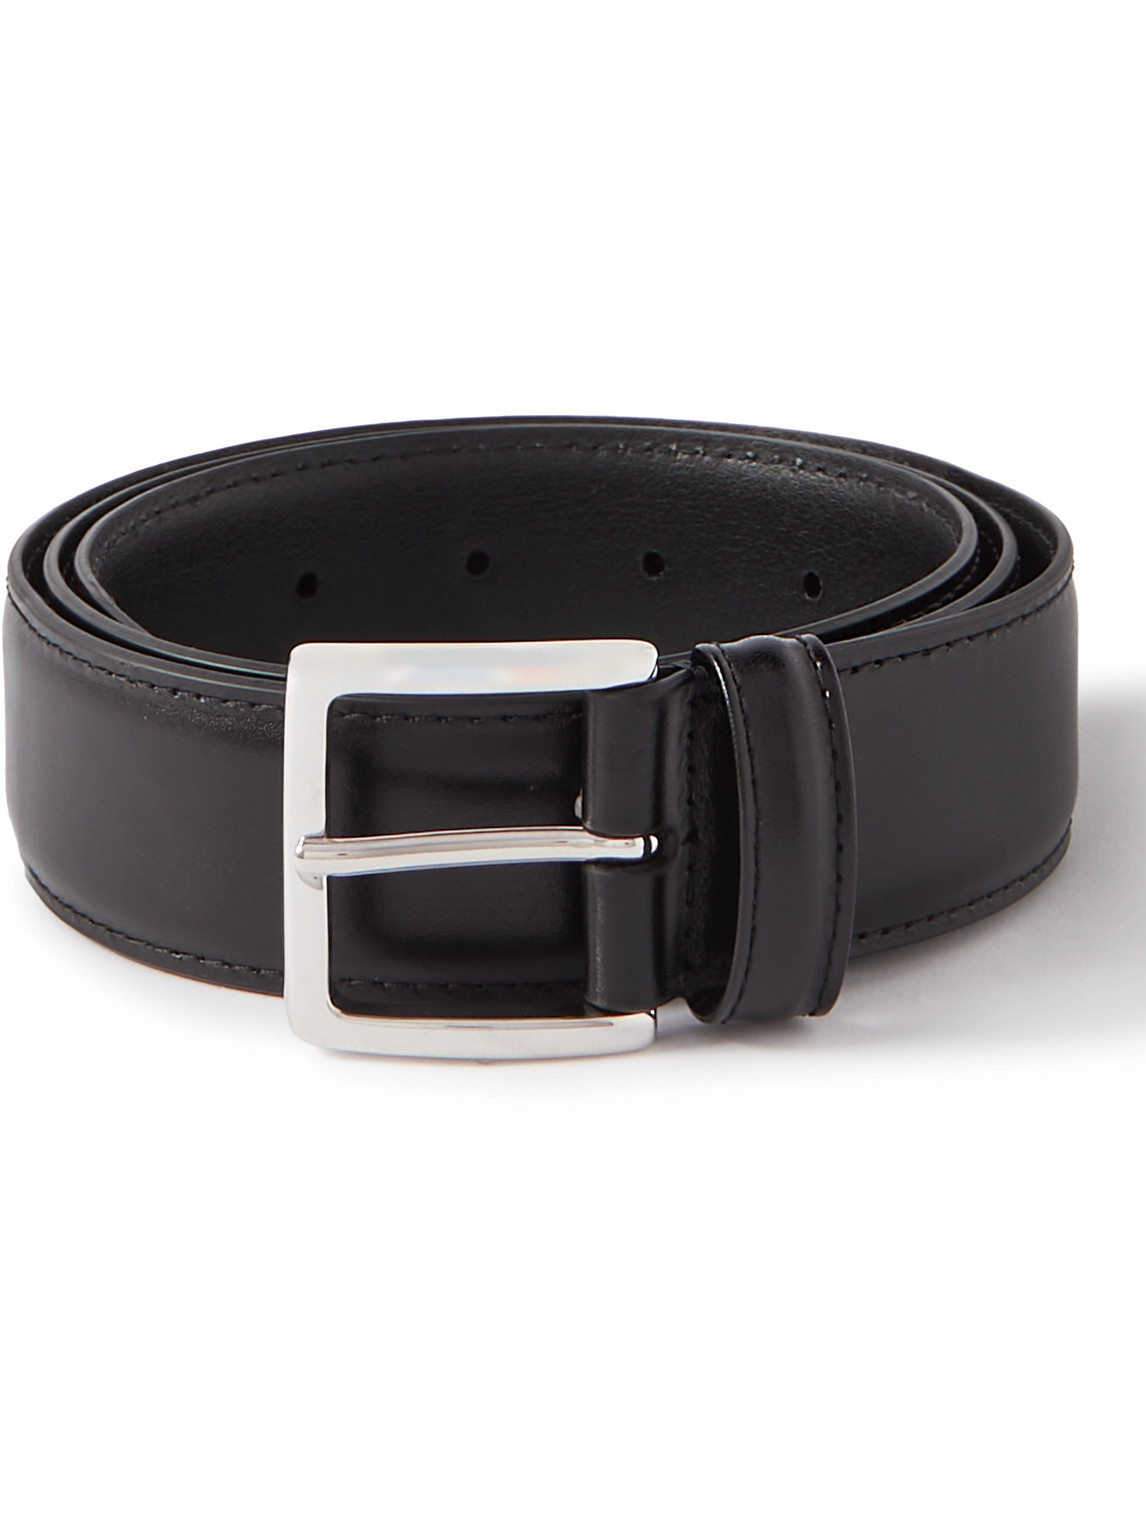 Anderson's 3.5cm Leather Belt In Black